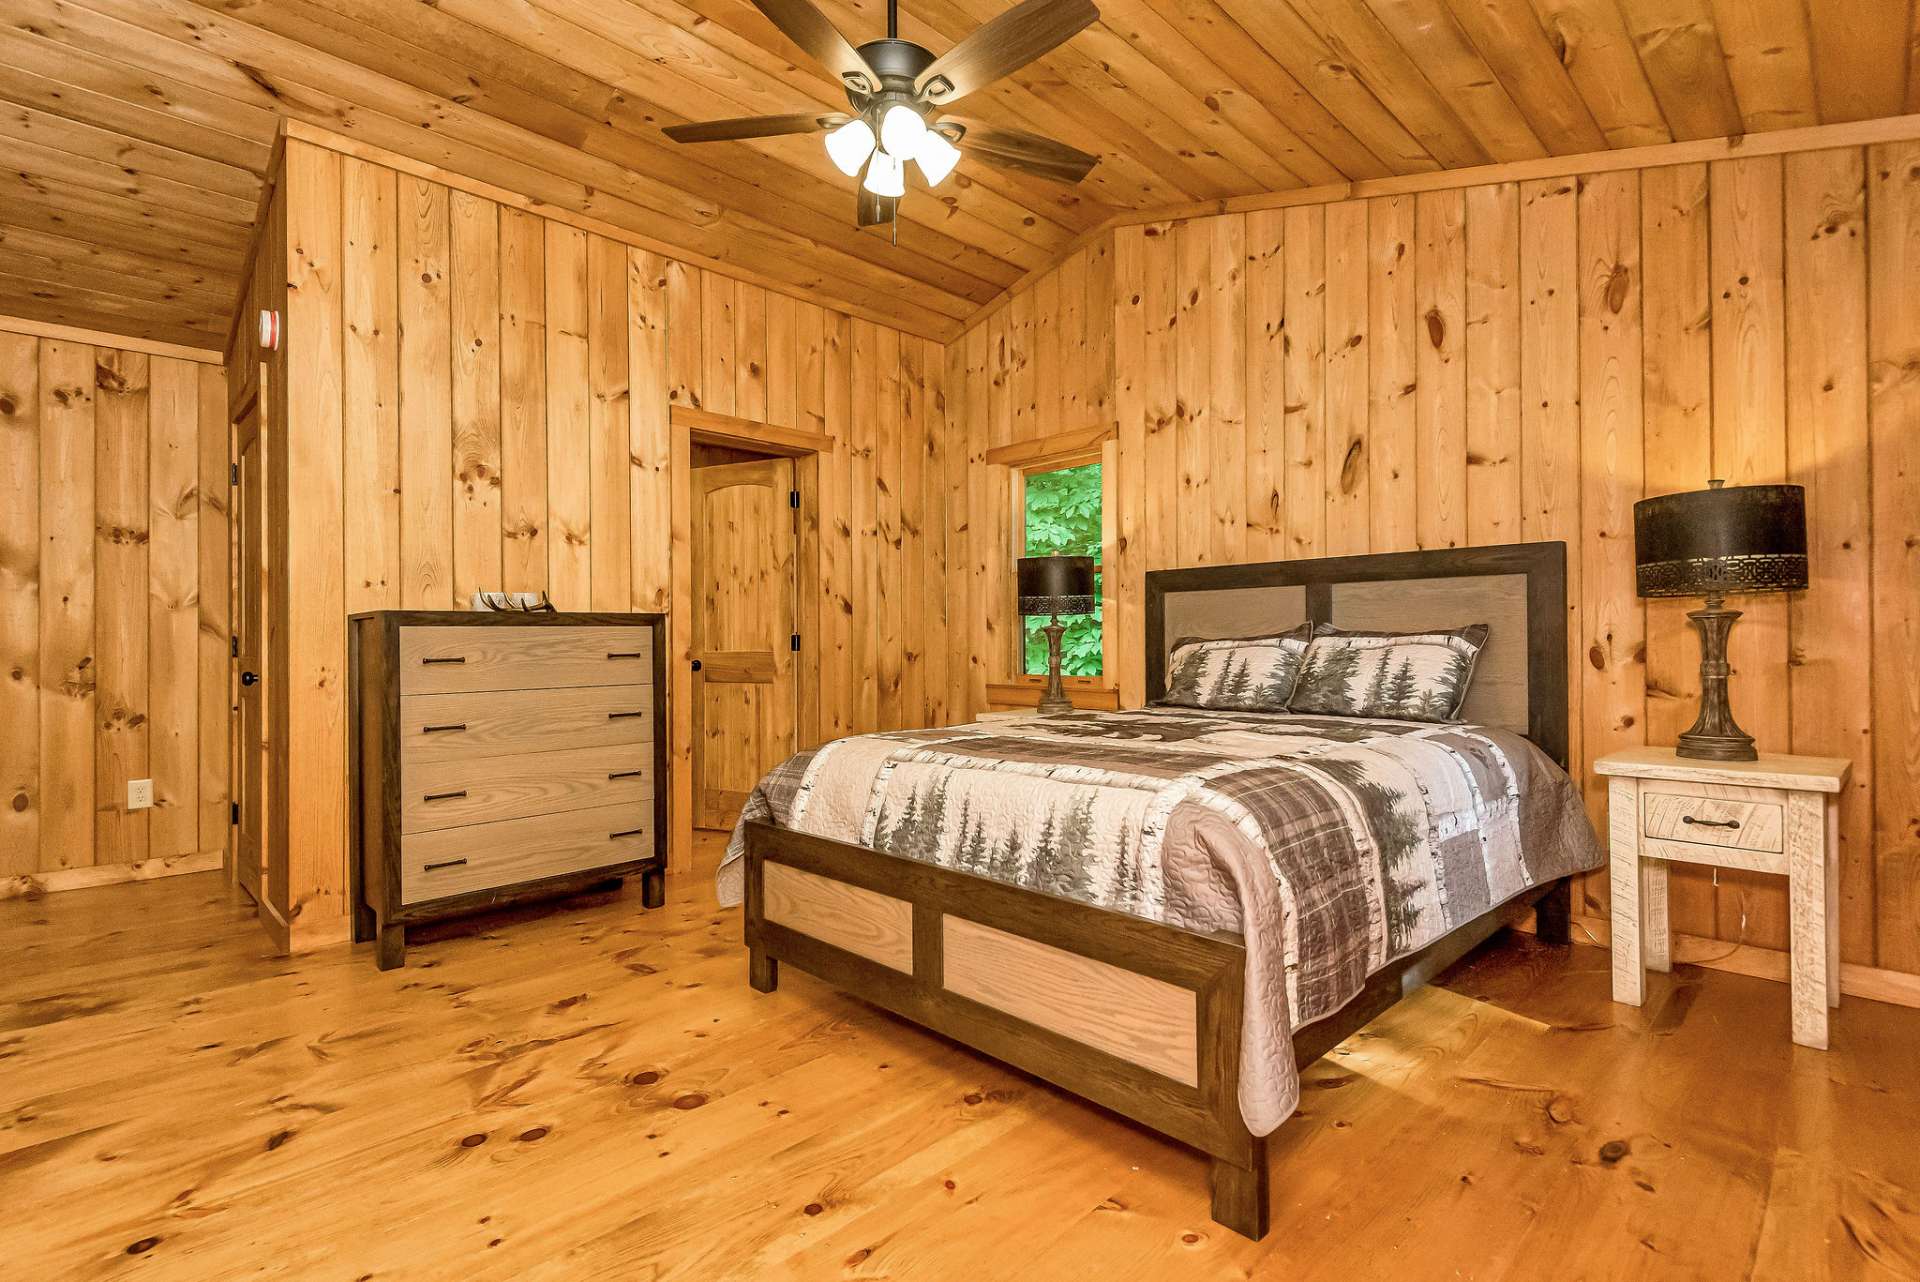 The loft maintains the charm of wide plank pine flooring and continues the cozy ambiance with tongue-and-groove walls and ceiling, echoing the rustic elegance found throughout the home.